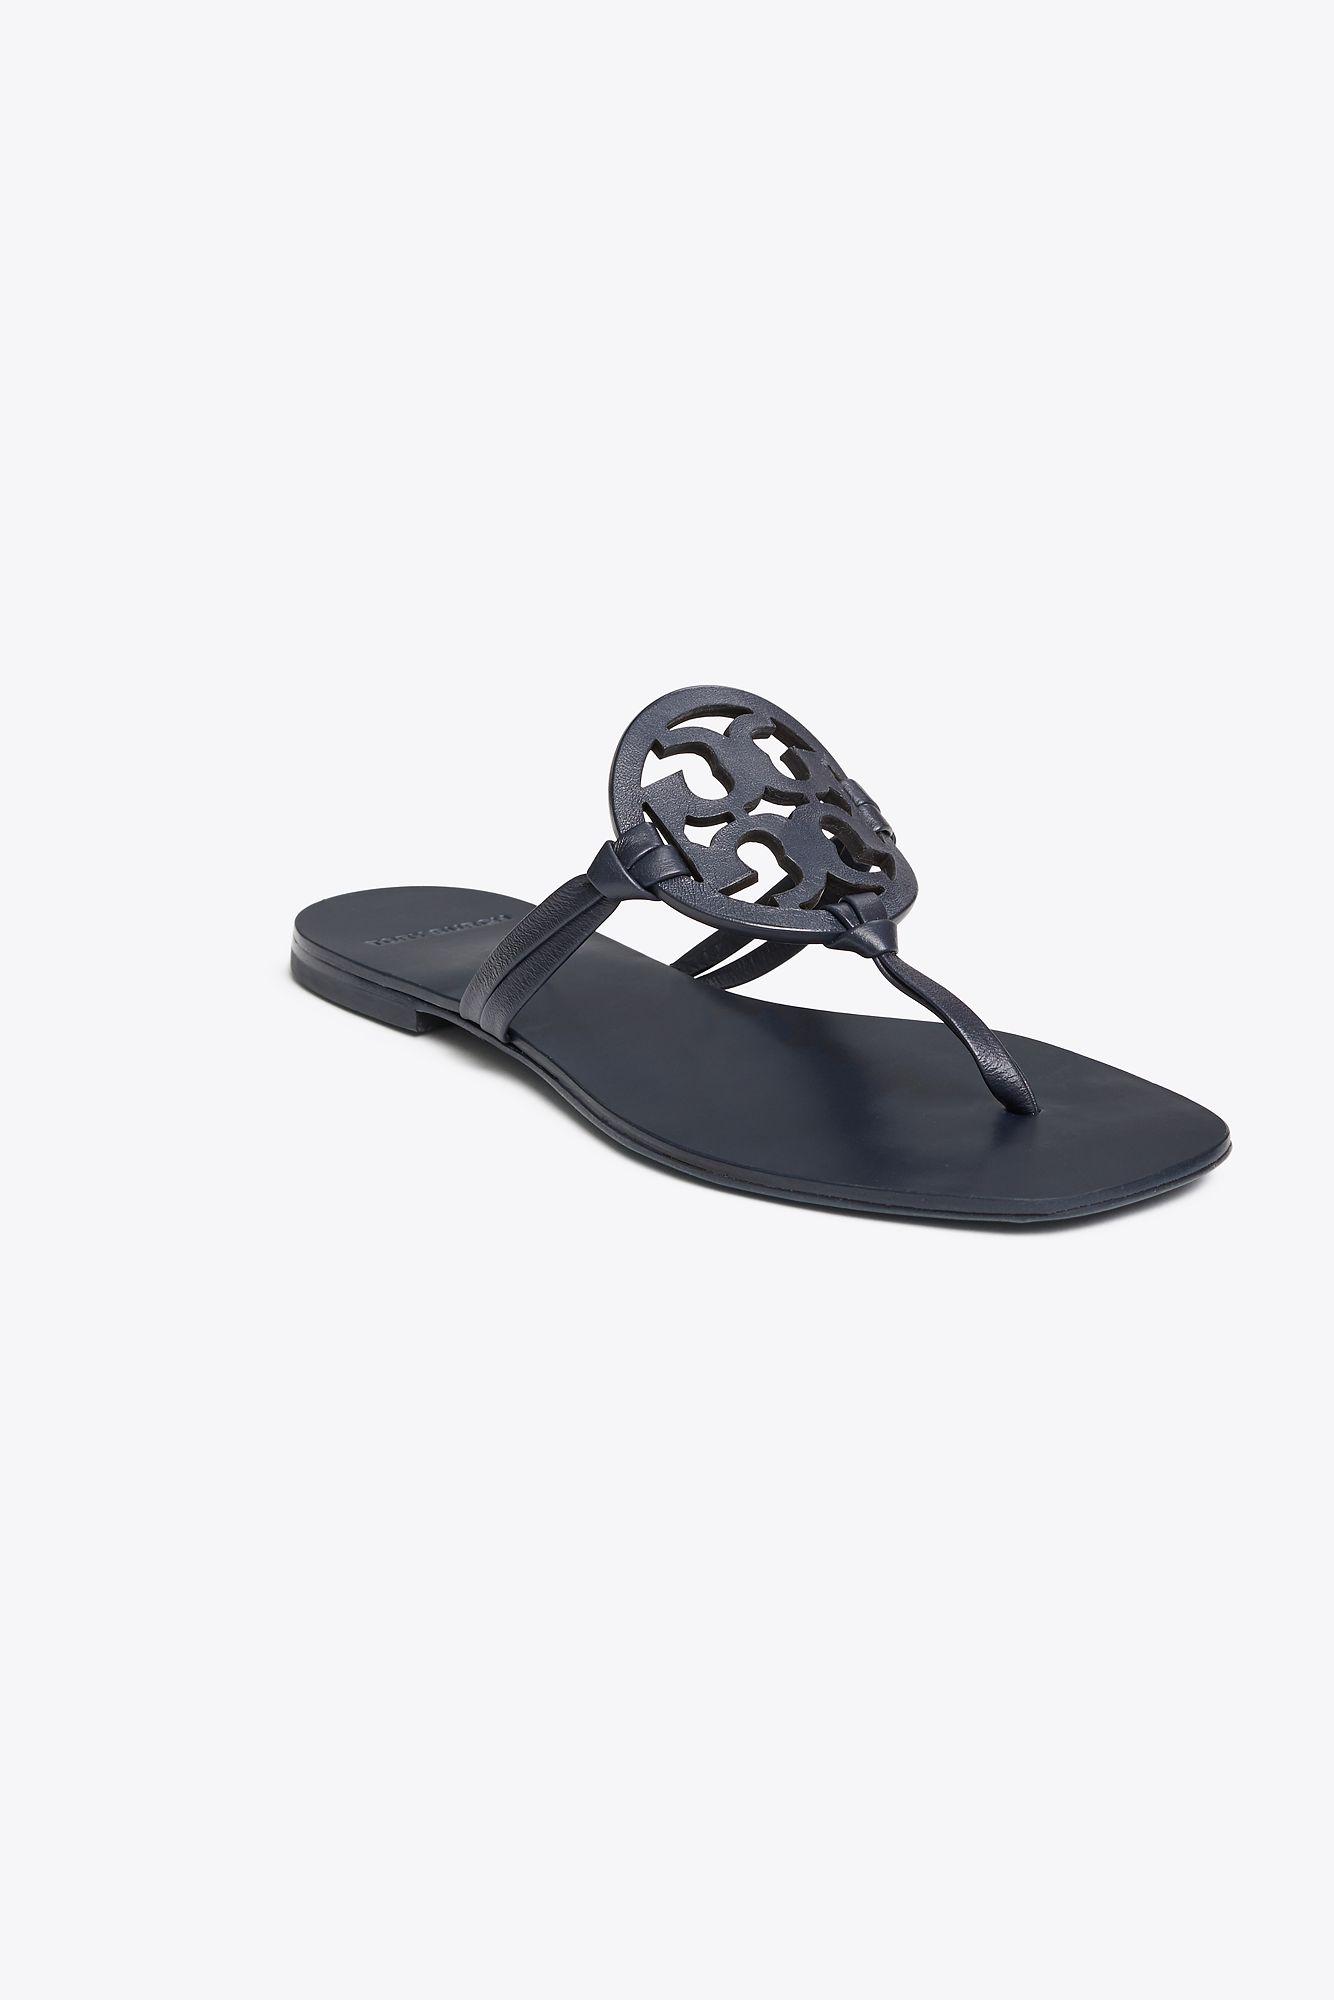 Tory Burch Miller Square-toe Sandals, Leather in Blue | Lyst